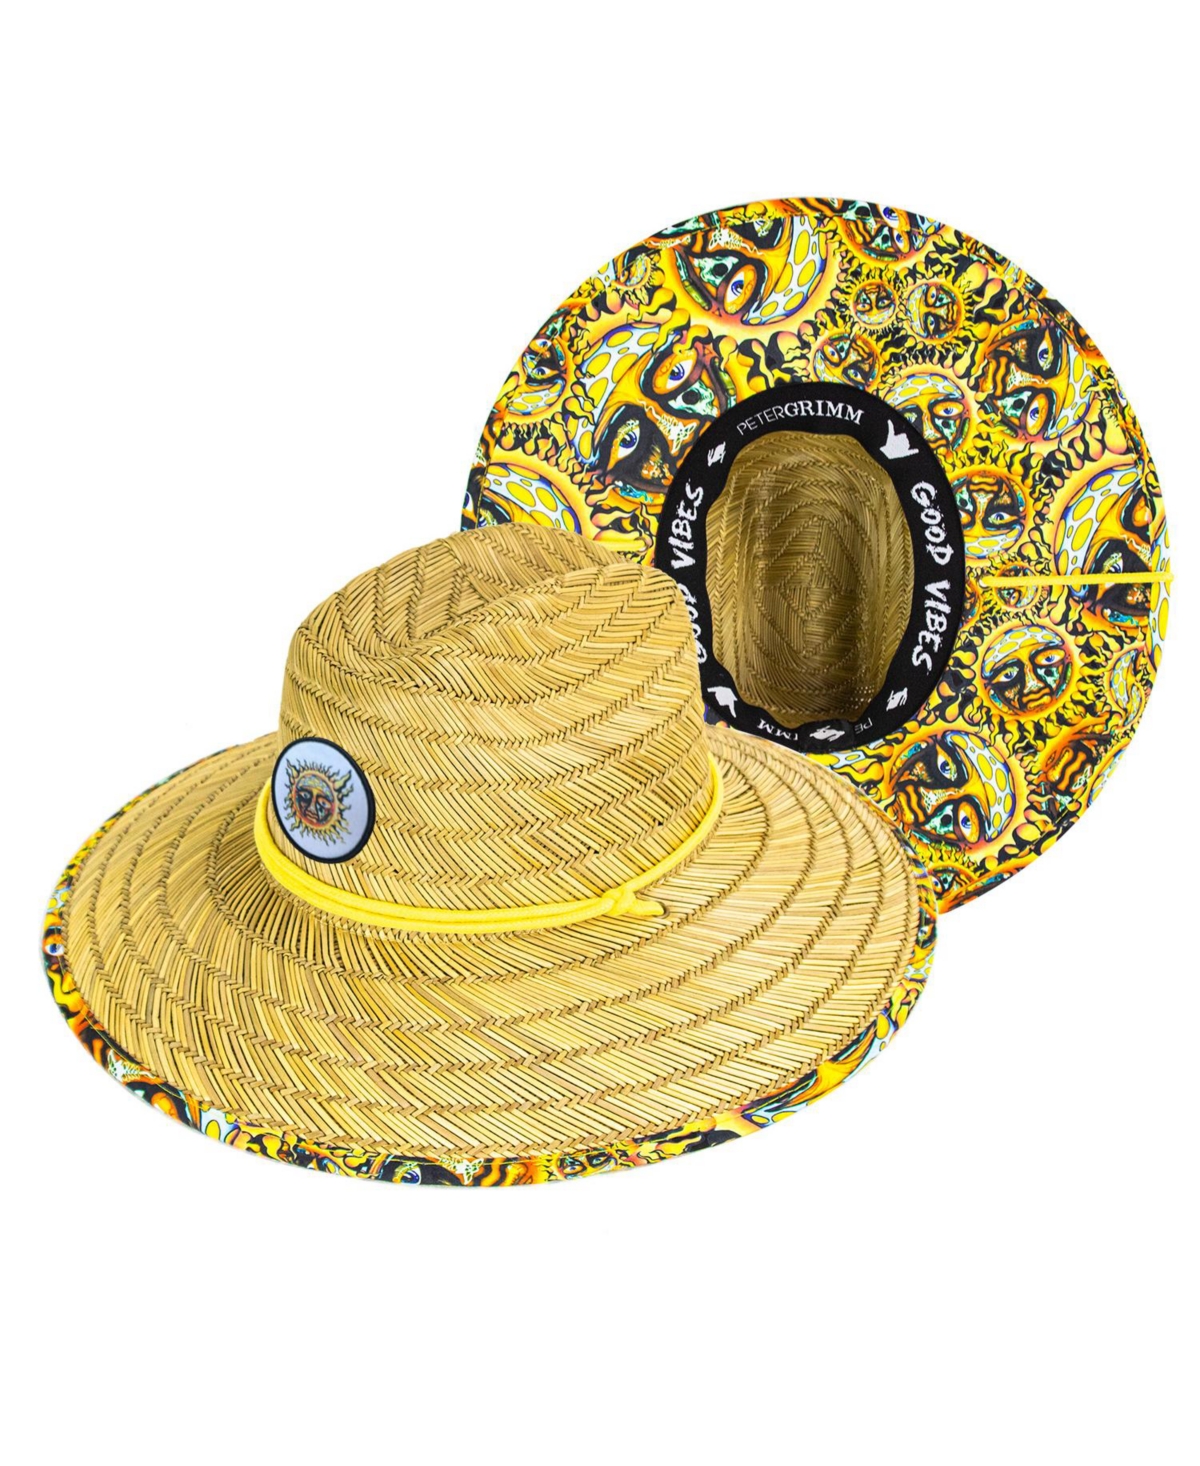 Paddle Out Sublime Lifeguard Hat - Natural